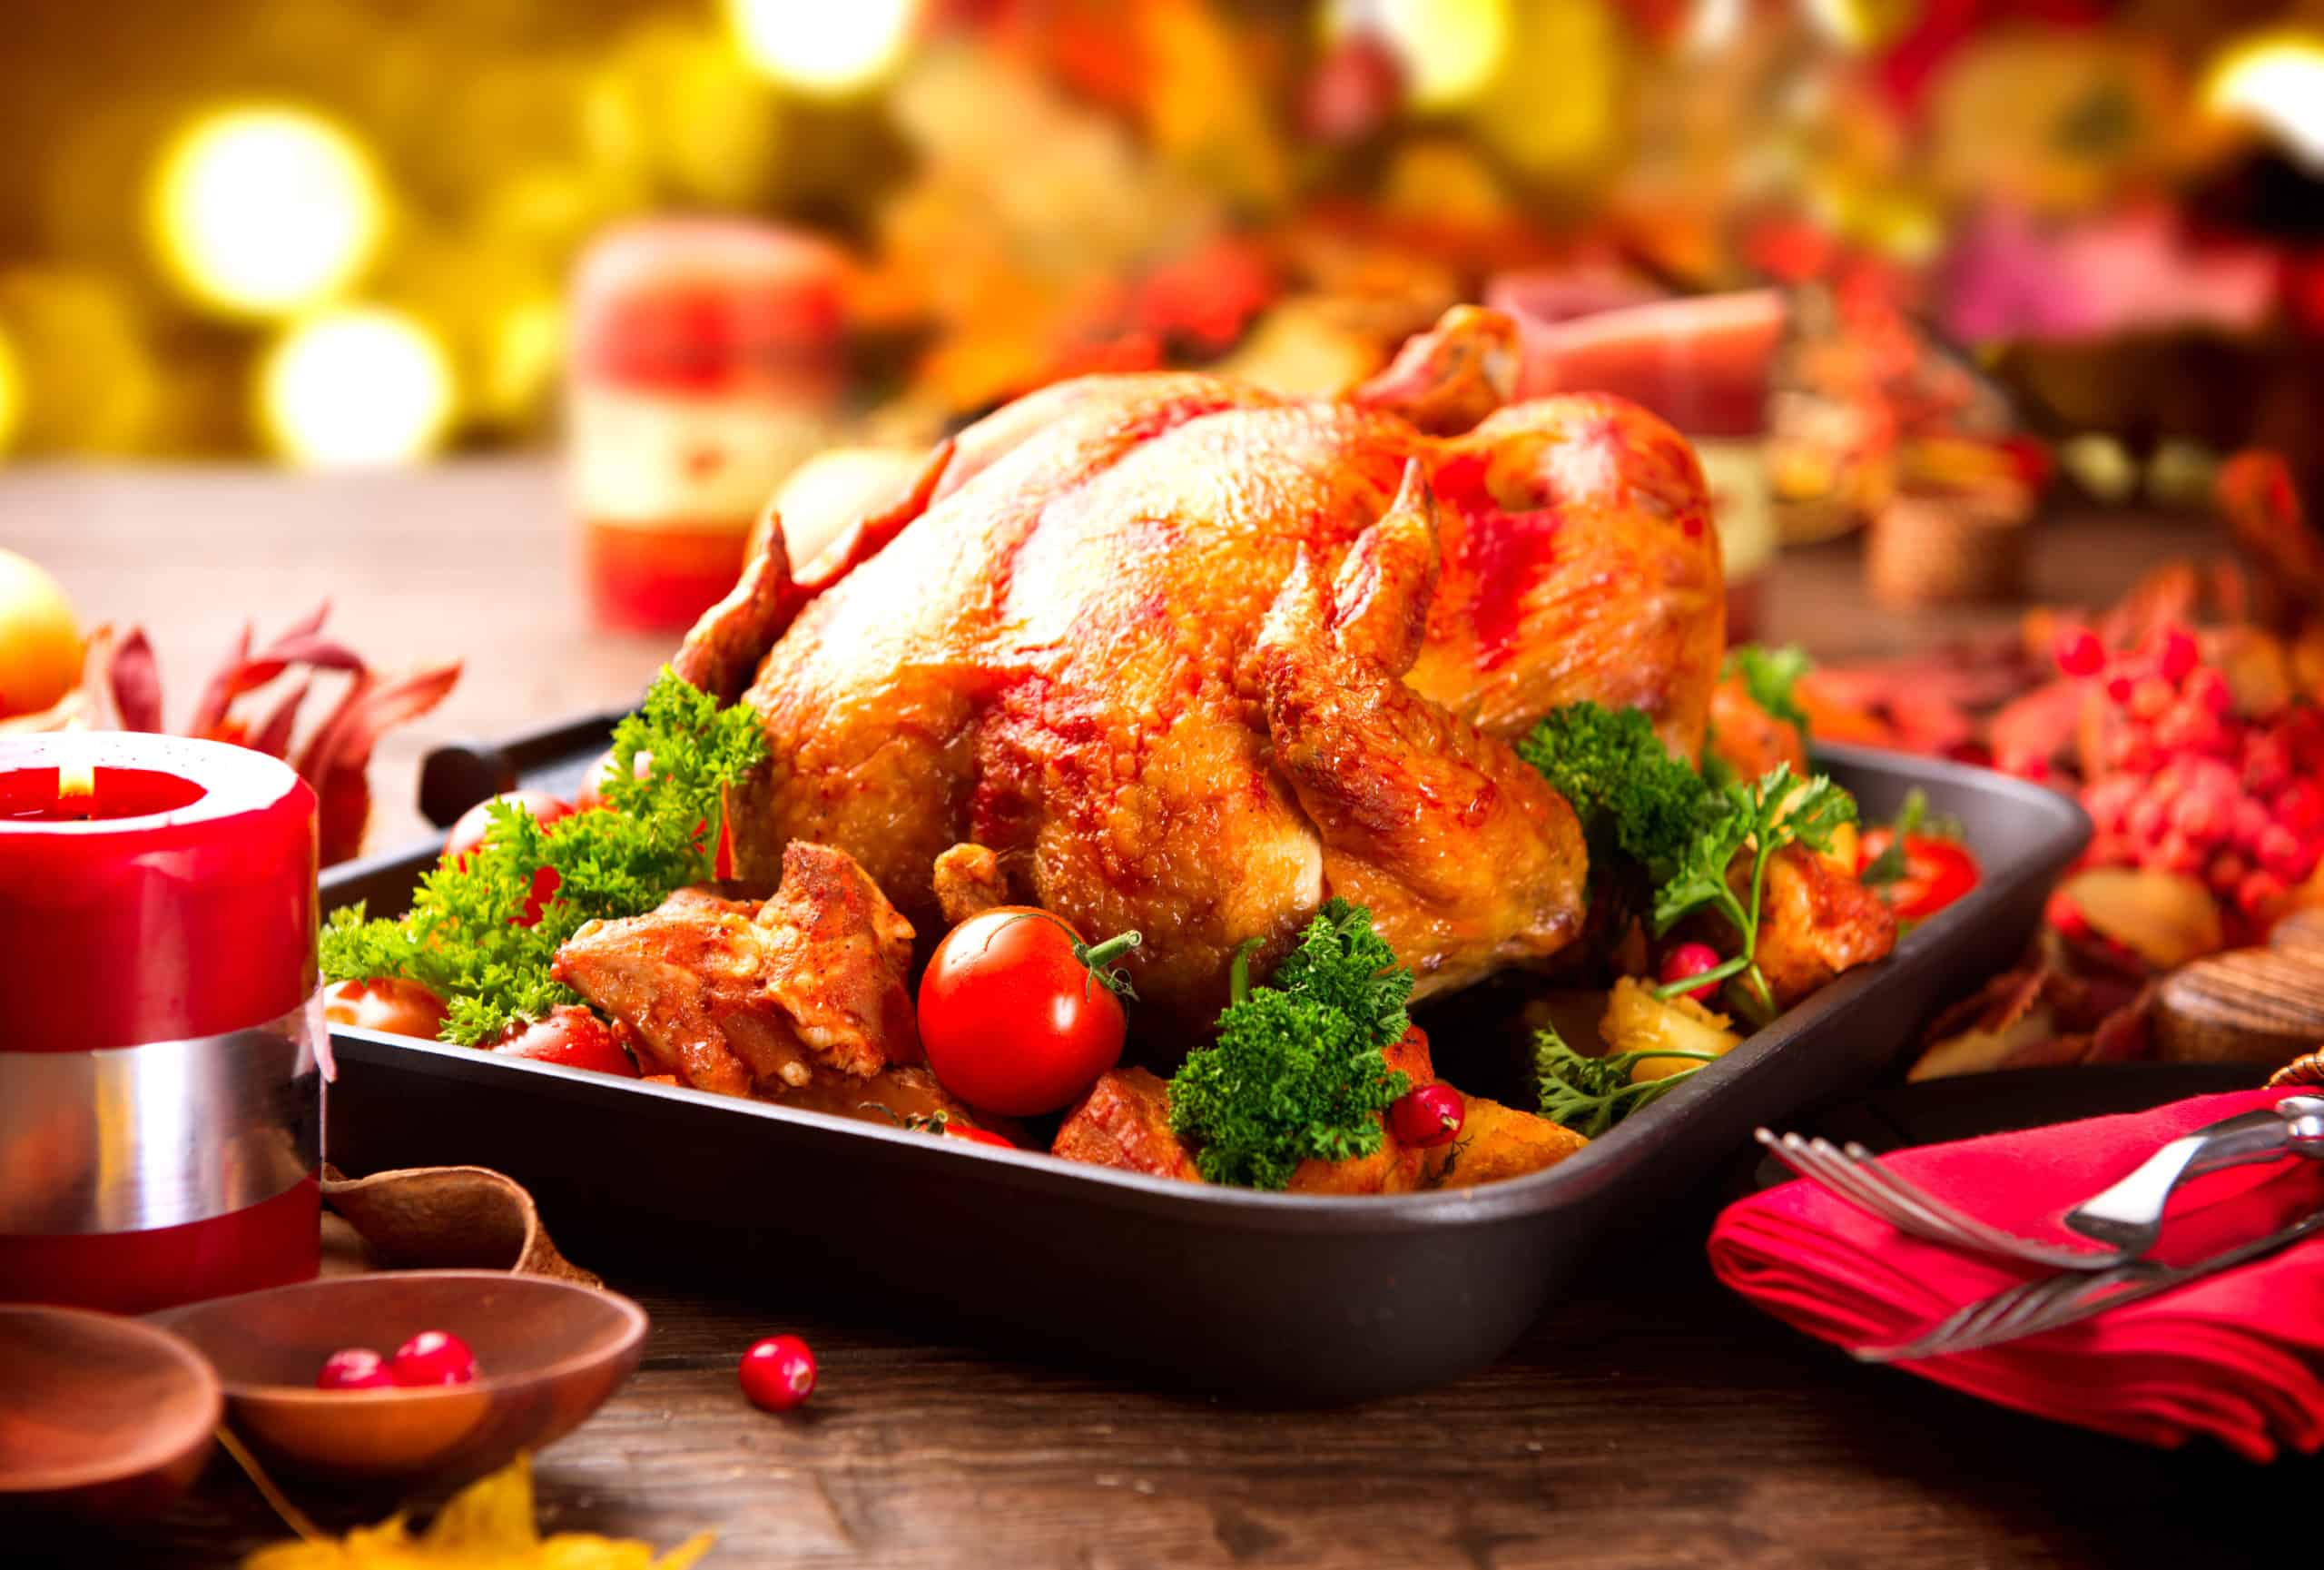 Thanksgiving Tips: How to Indulge While Making Healthy Choices